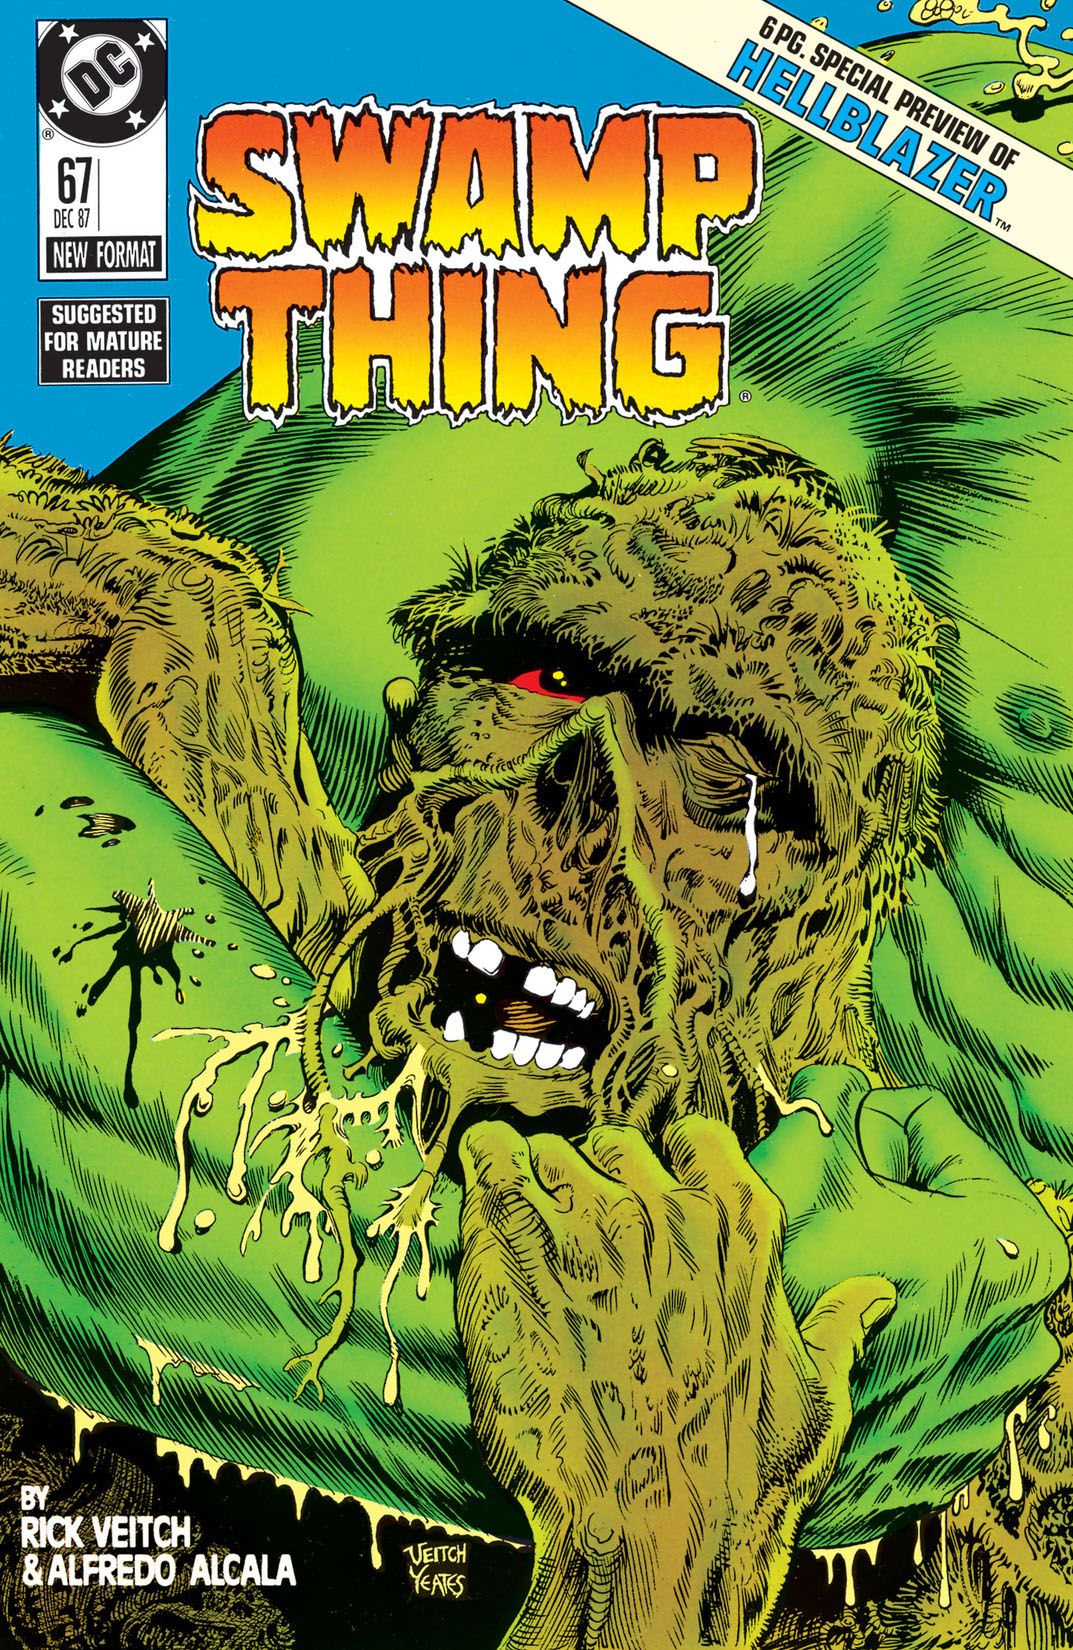 Swamp Thing (1985-1996) #67 preview images